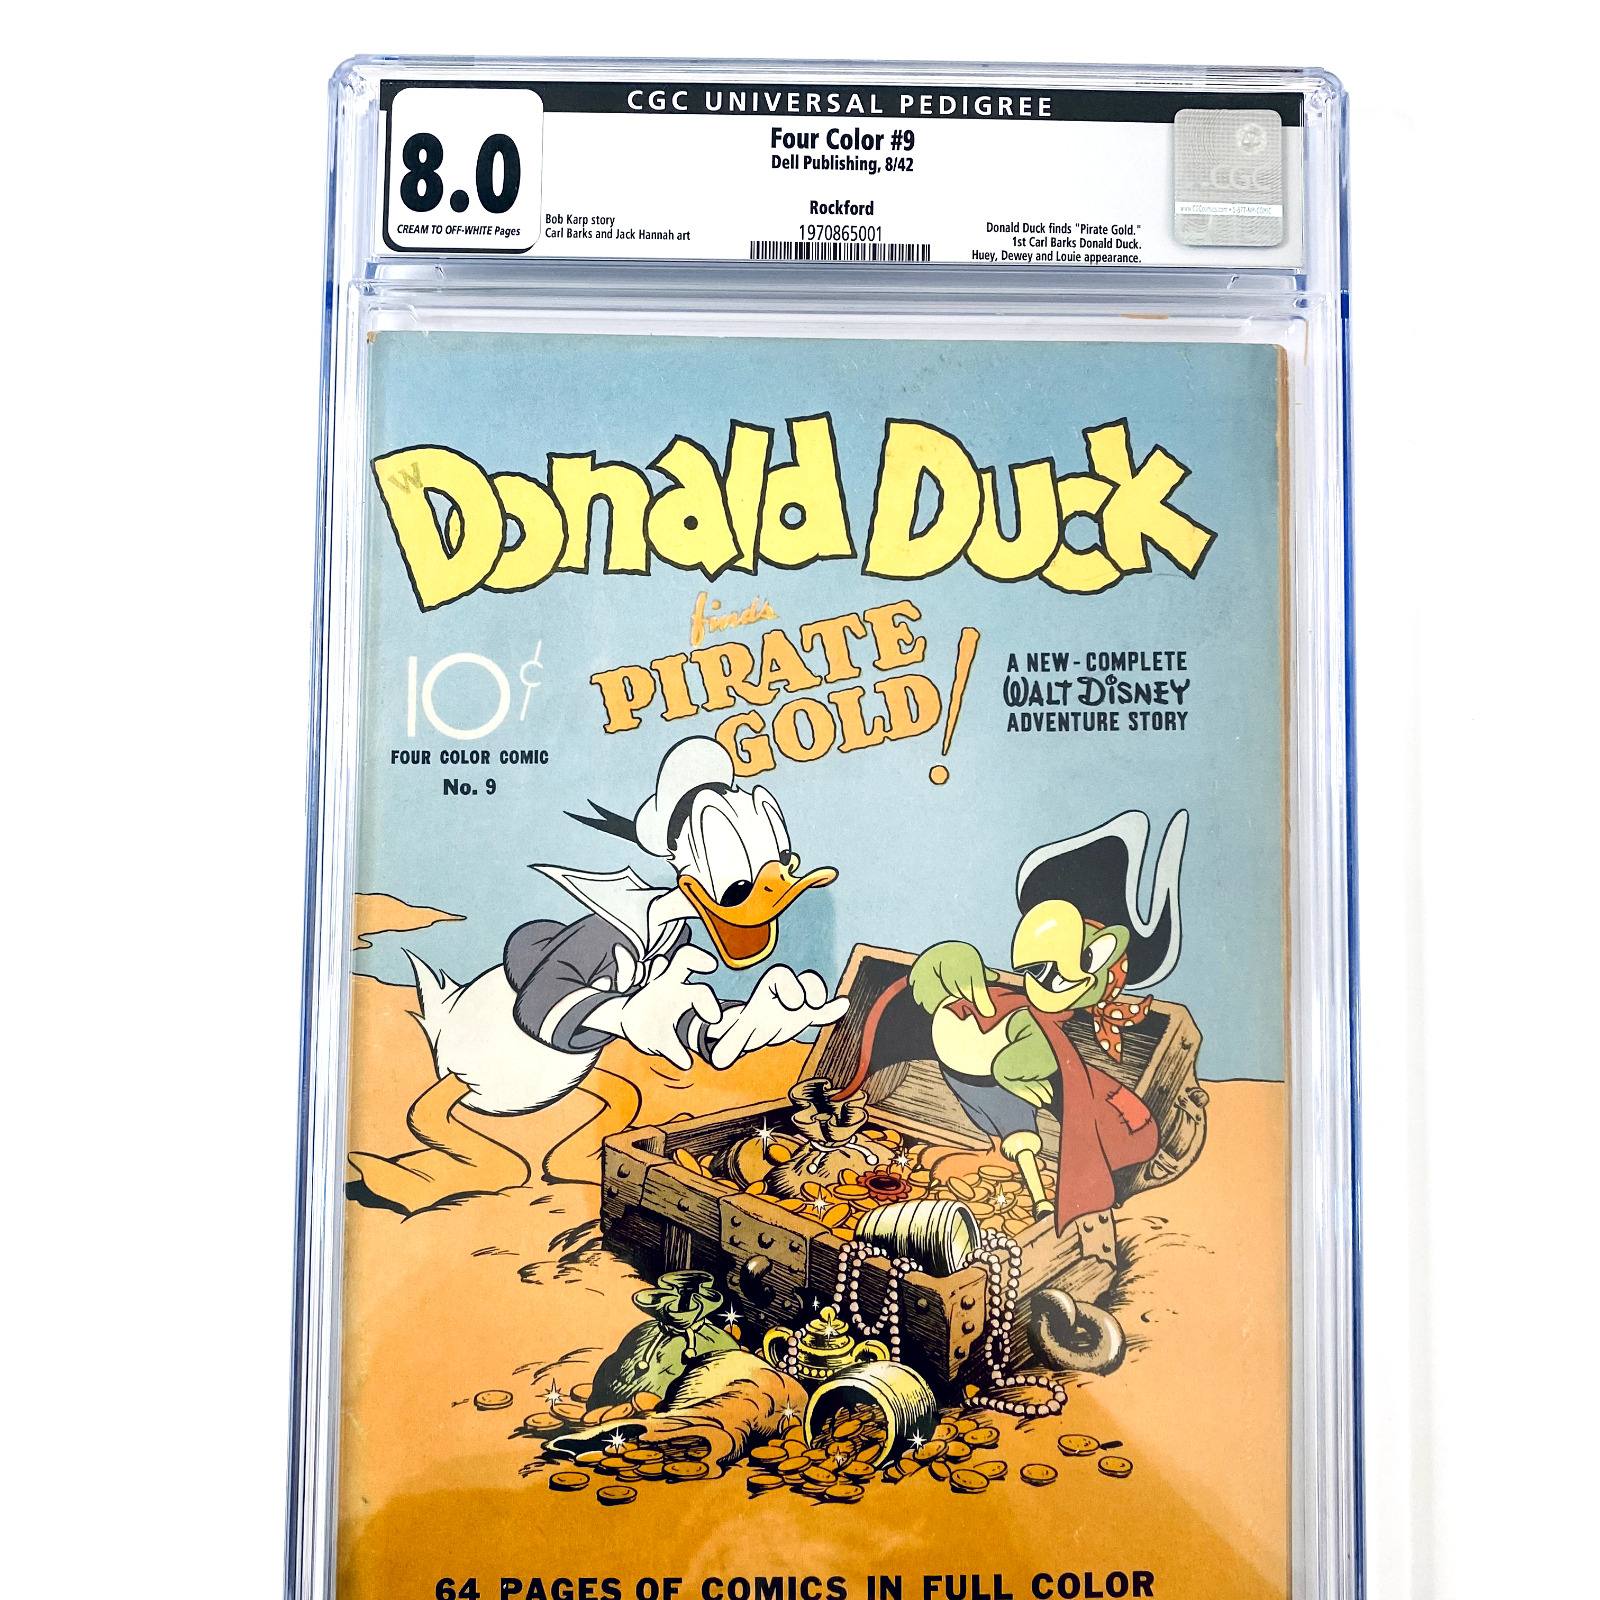 1942 Four Color #9 CGC 8.0 Donald Duck Finds Pirate Gold